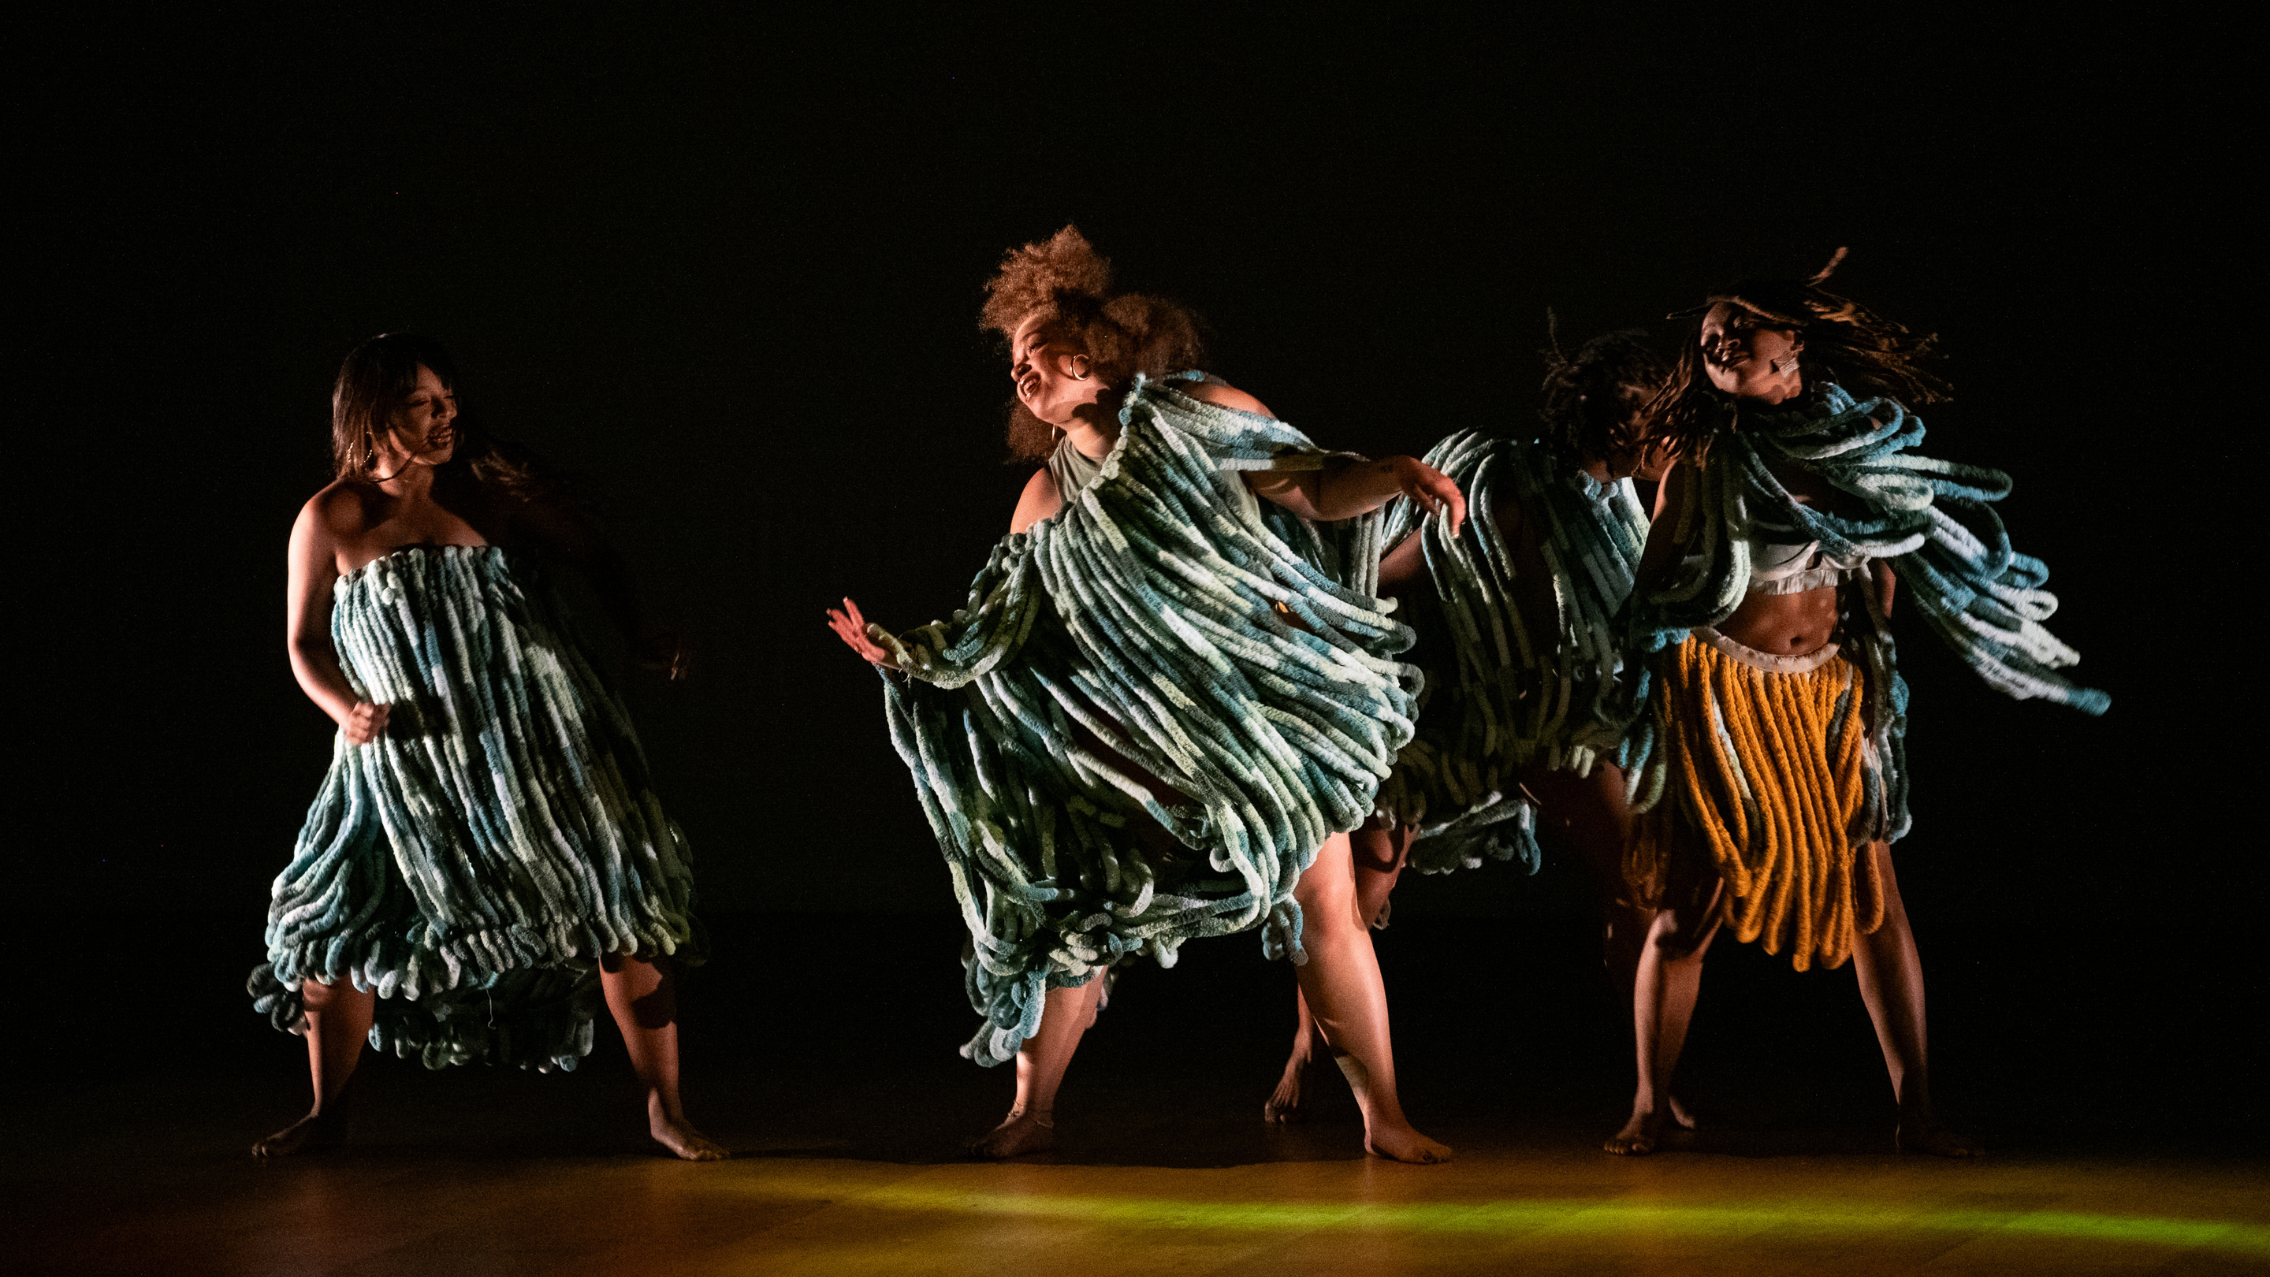 Four Black women in vibrant costumes dance on a warmly lit stage.